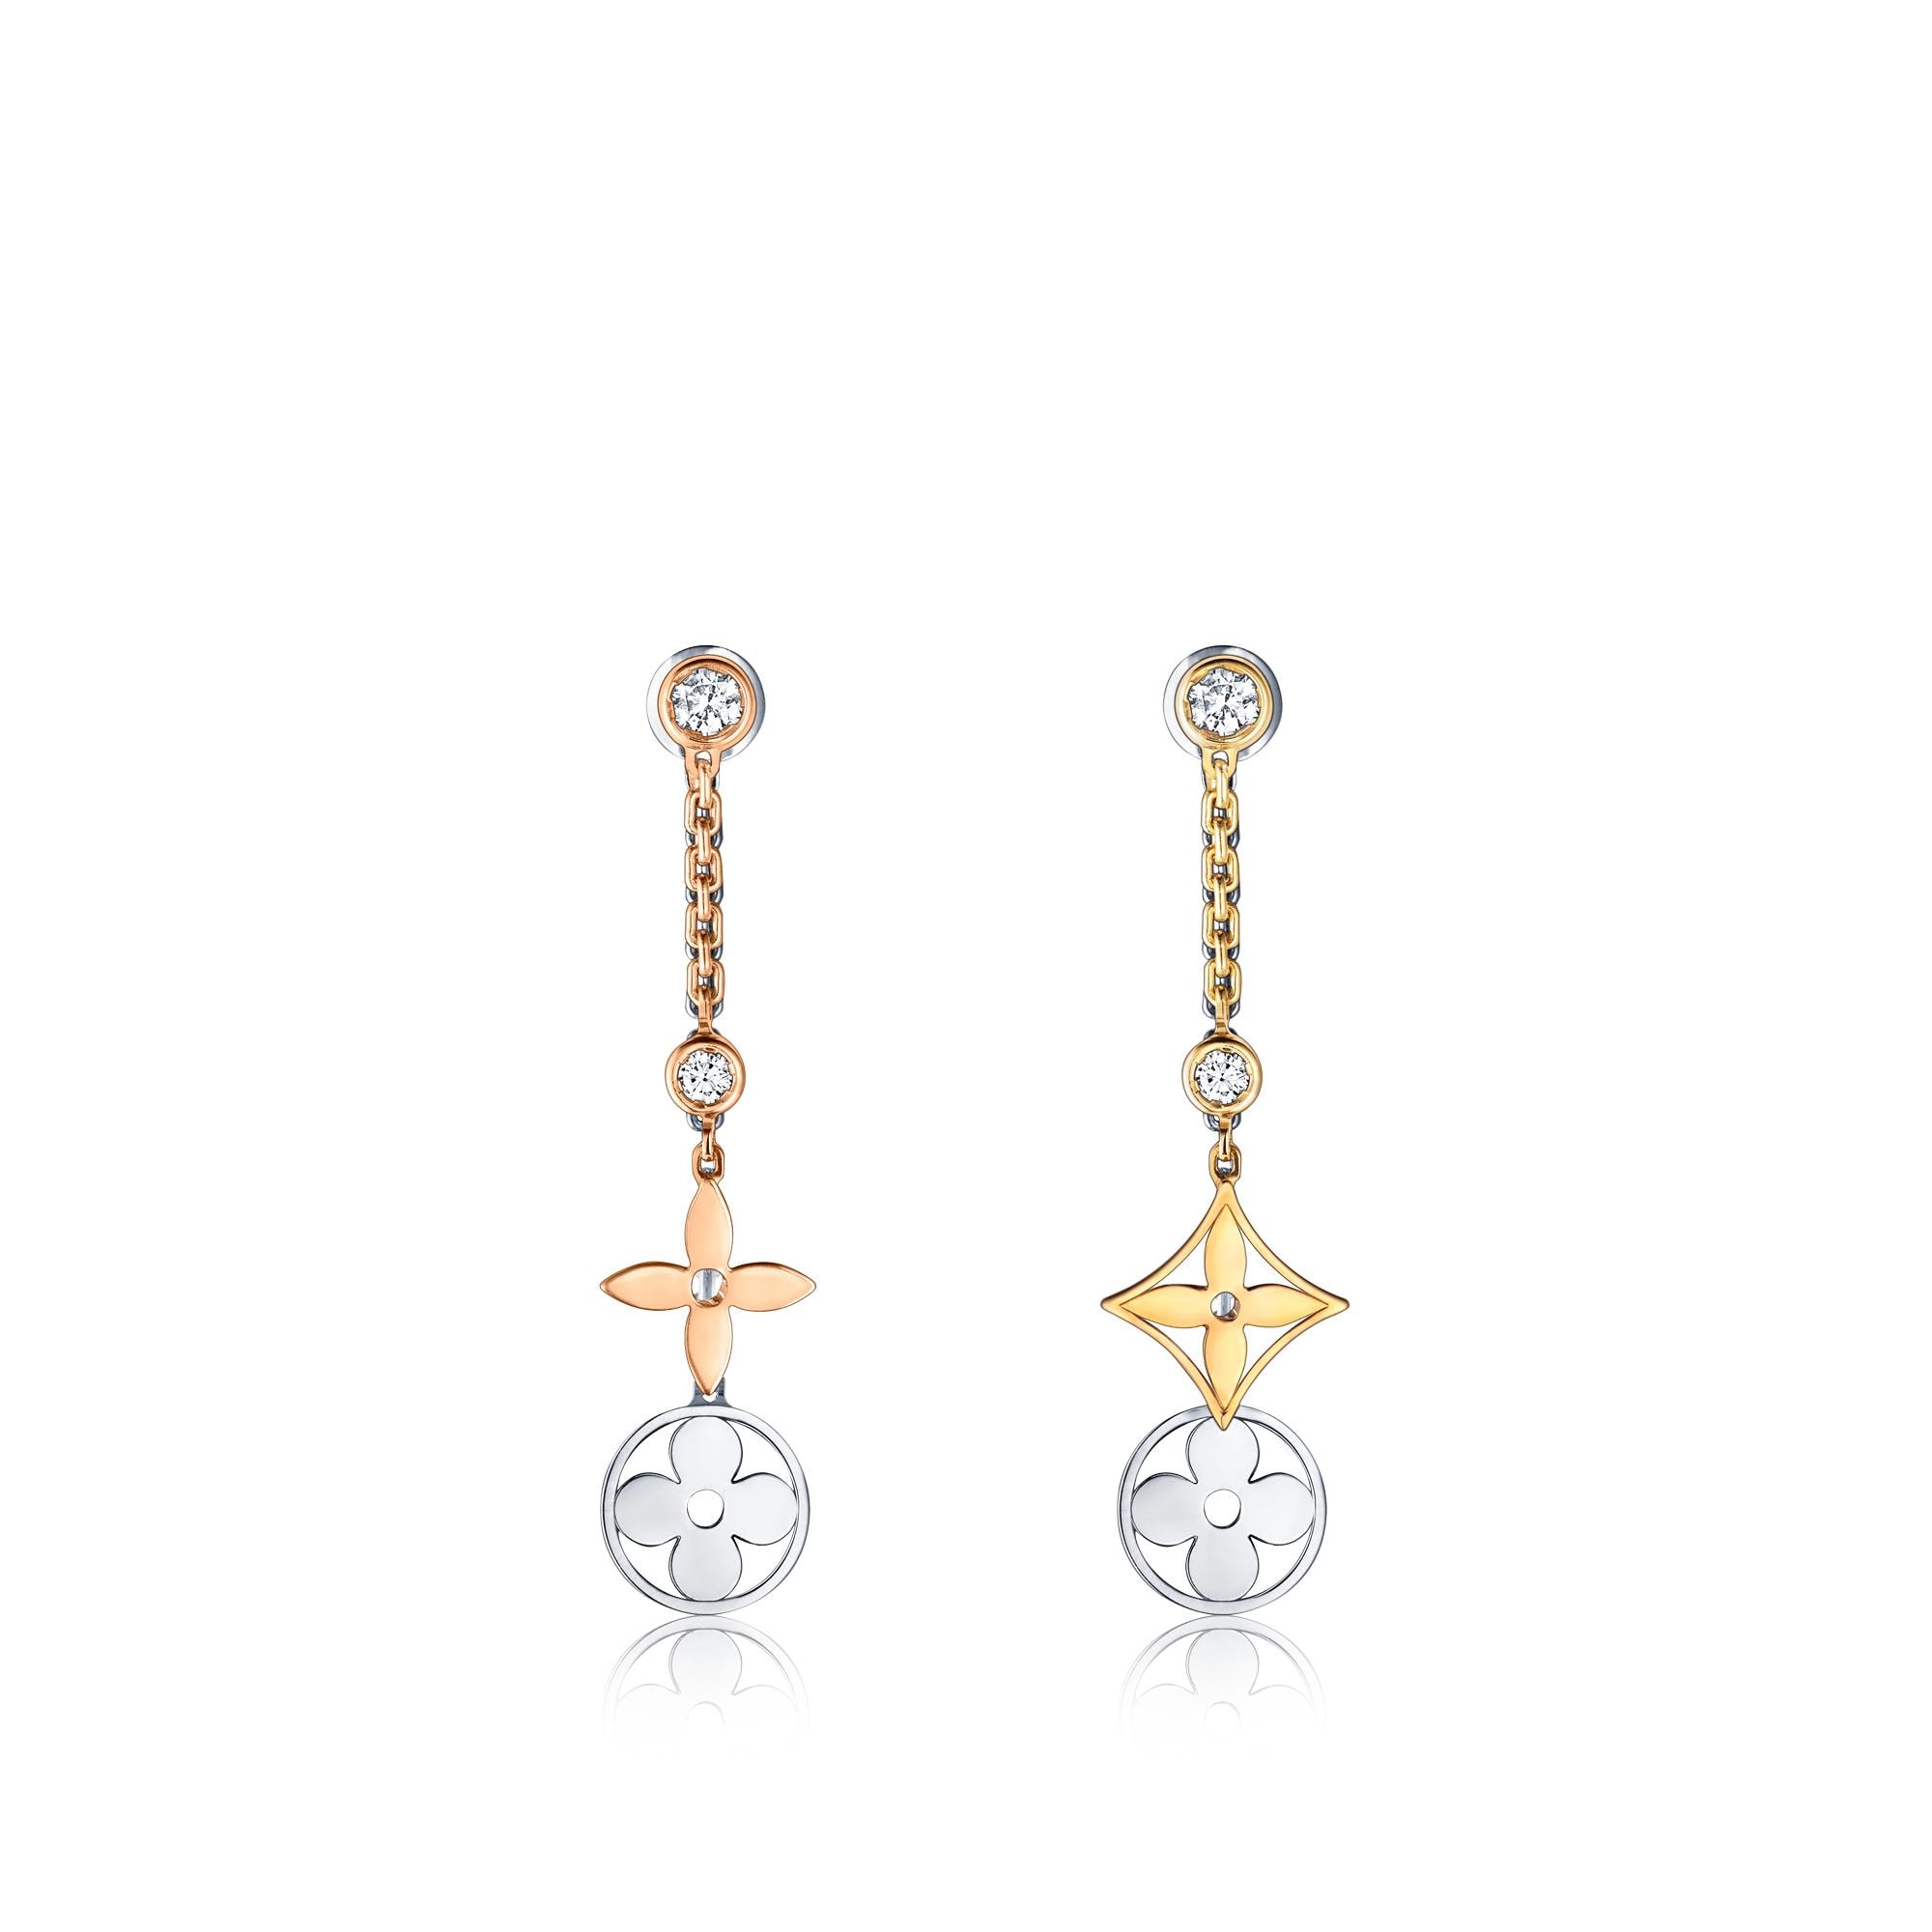 Louis Vuitton Blossom long earrings, 3 golds and diamonds – WOMEN – Jewelry Q96413